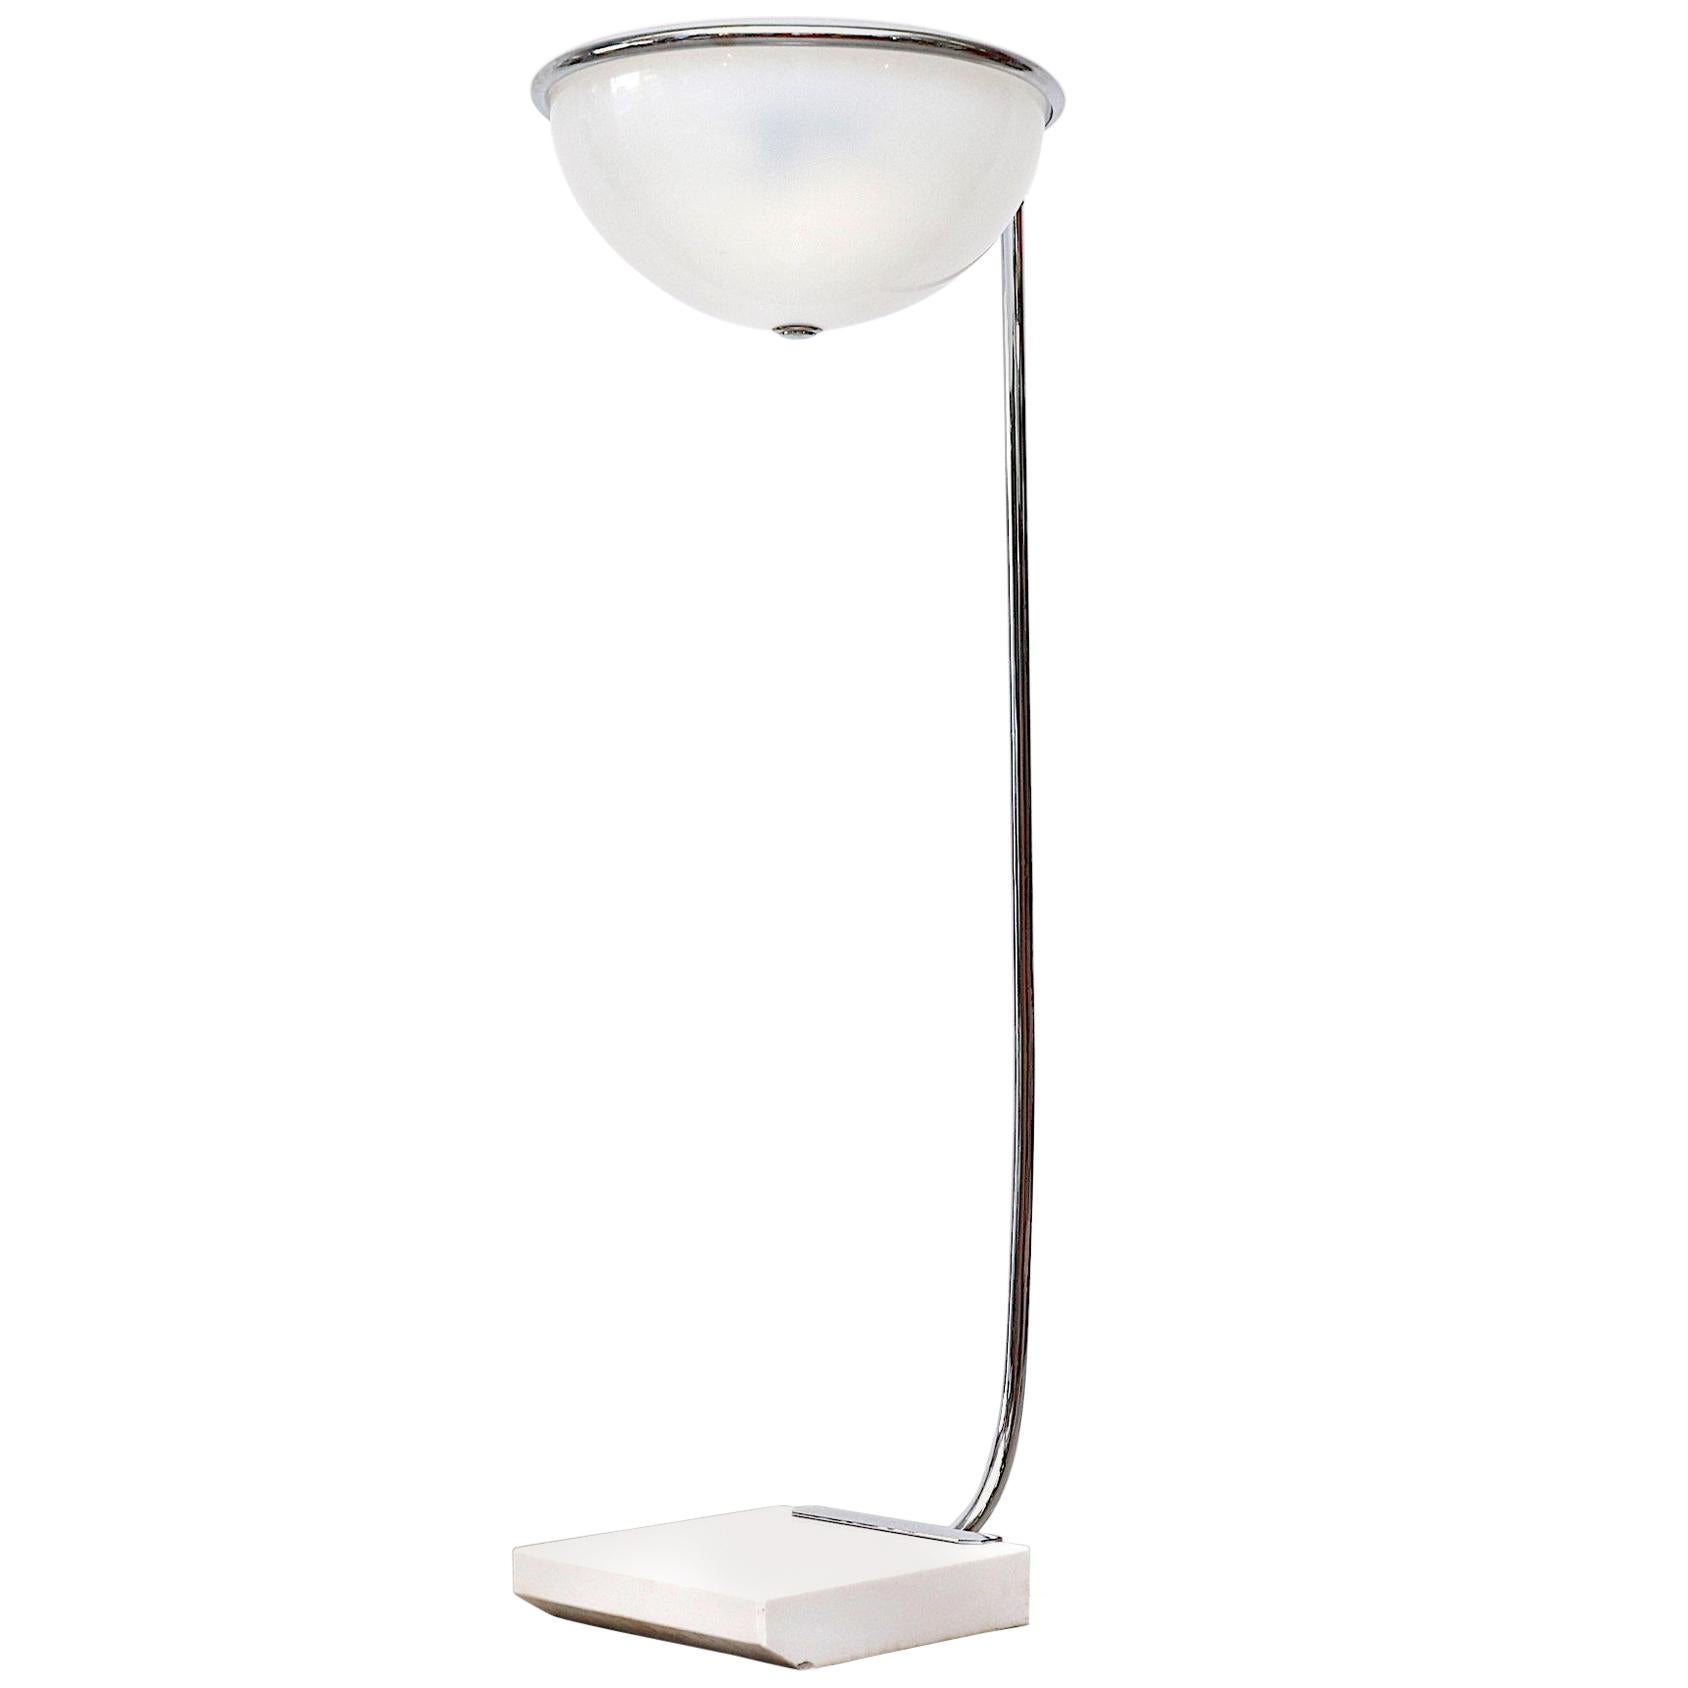 Mod 1970s 'Town Hall' Floor Lamp with Marble Base For Sale